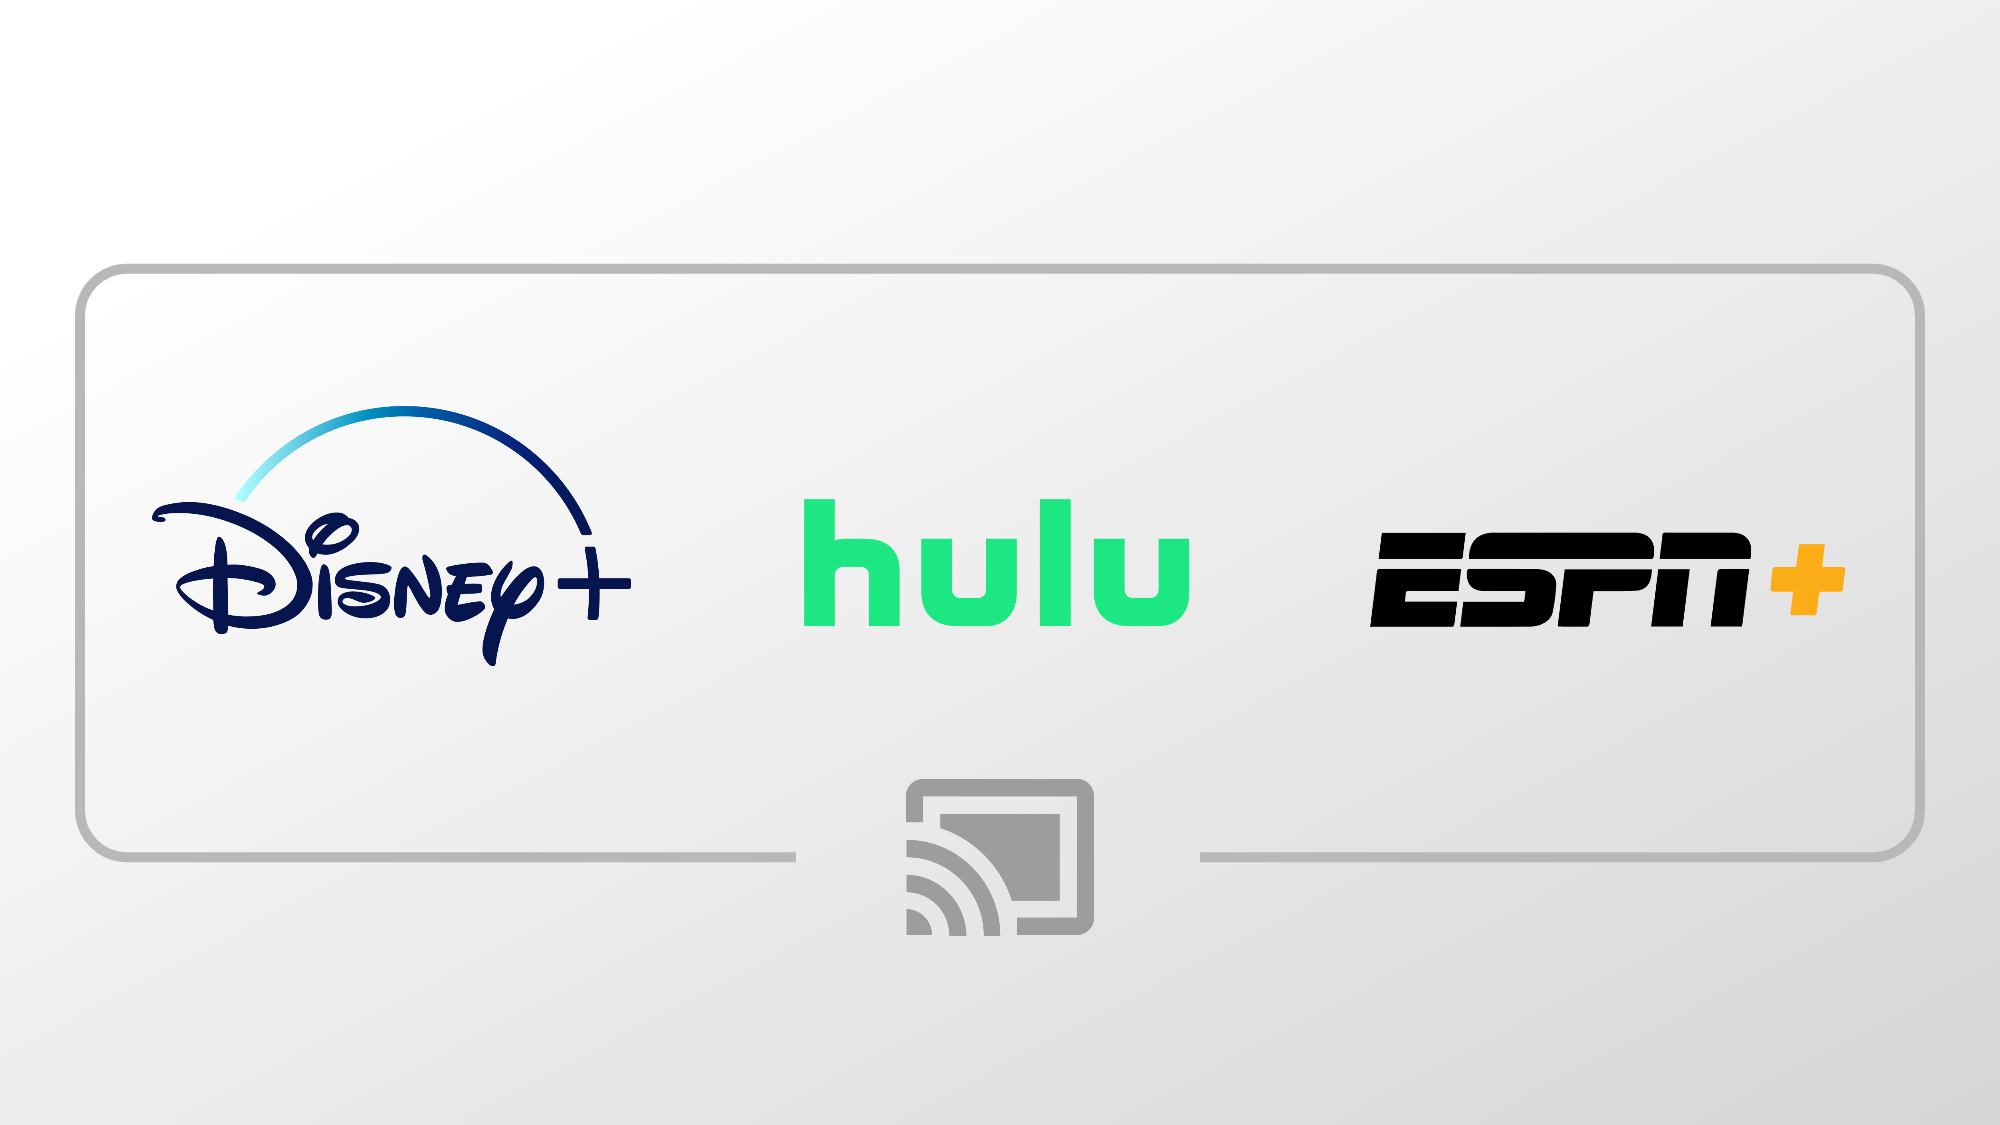 How To Watch Espn+ On Hulu